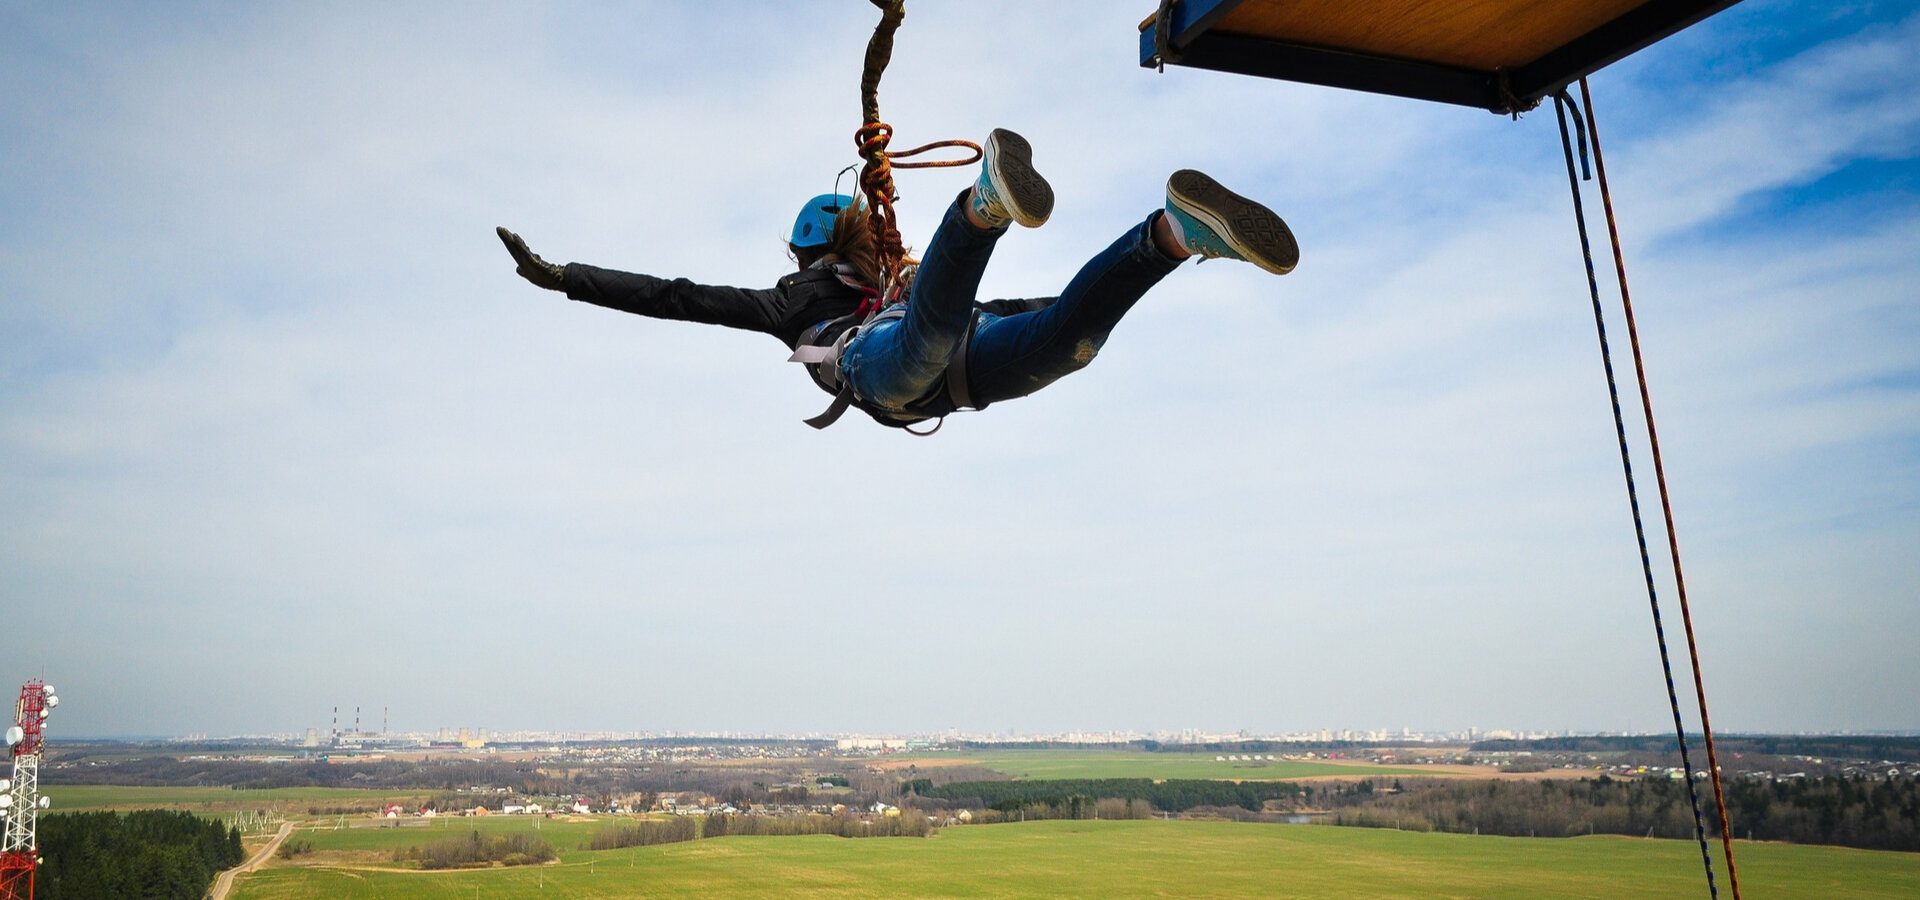 bungee jumping destinations in india